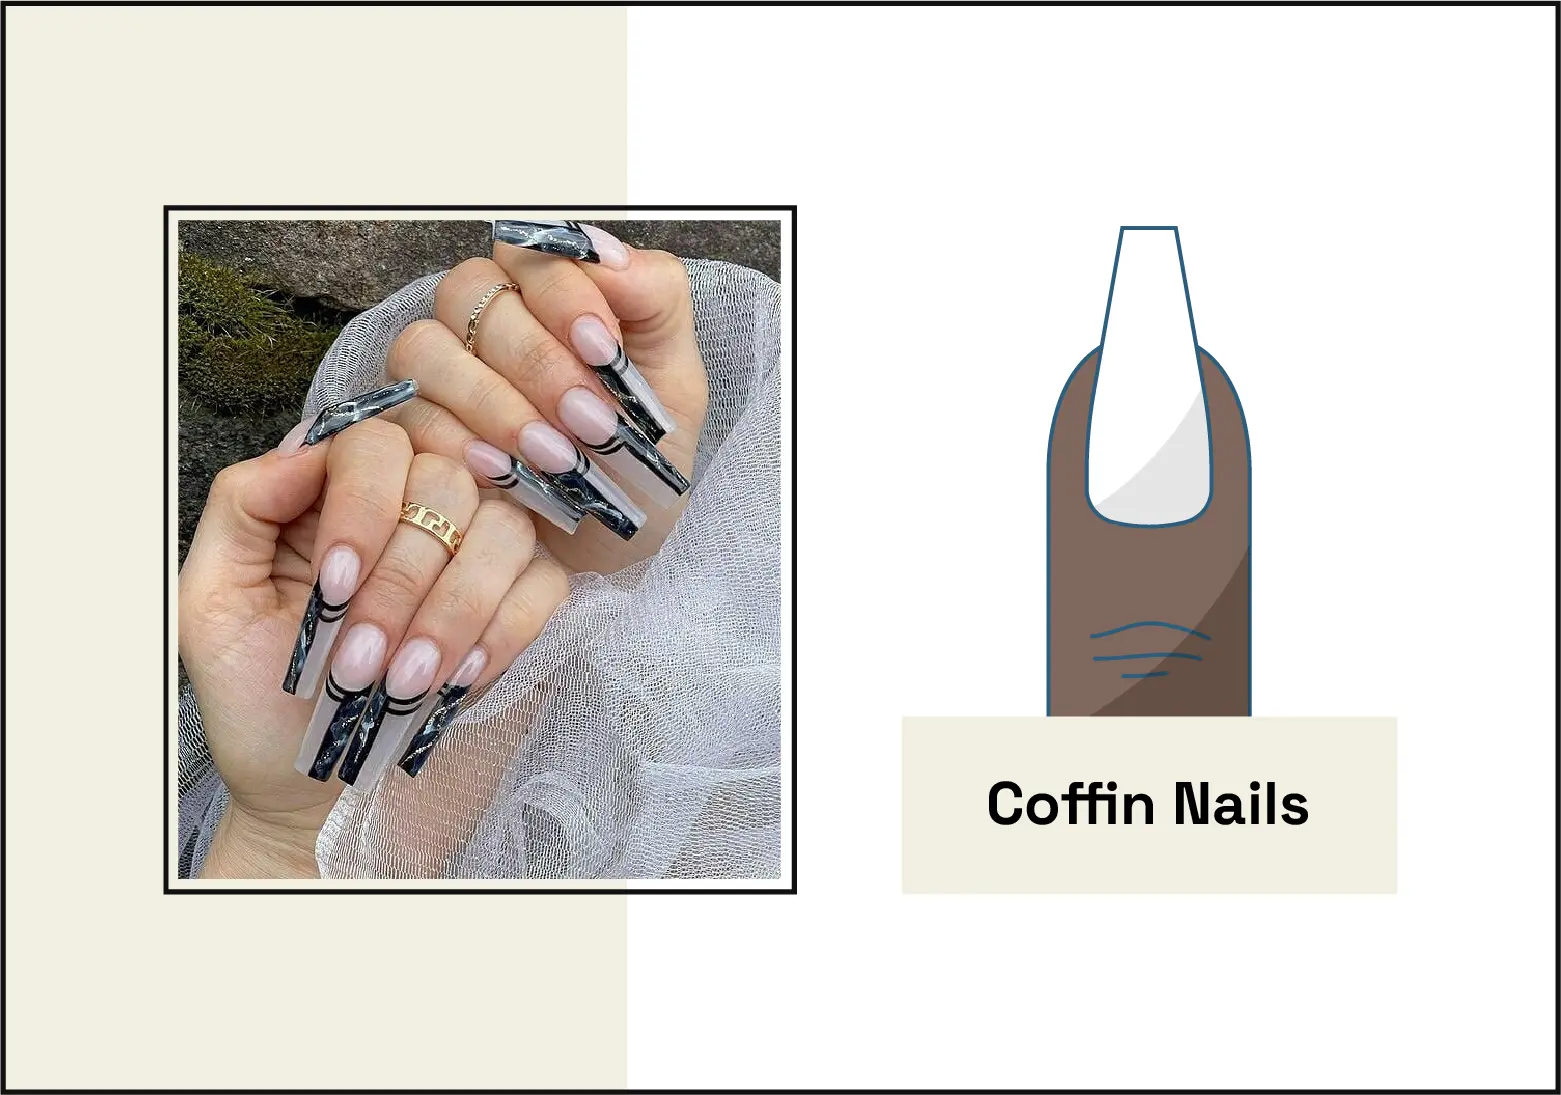 photo of manicure with coffin-shaped nails with clear and black marble nail art on the left, illustration of the coffin nail shape on the right